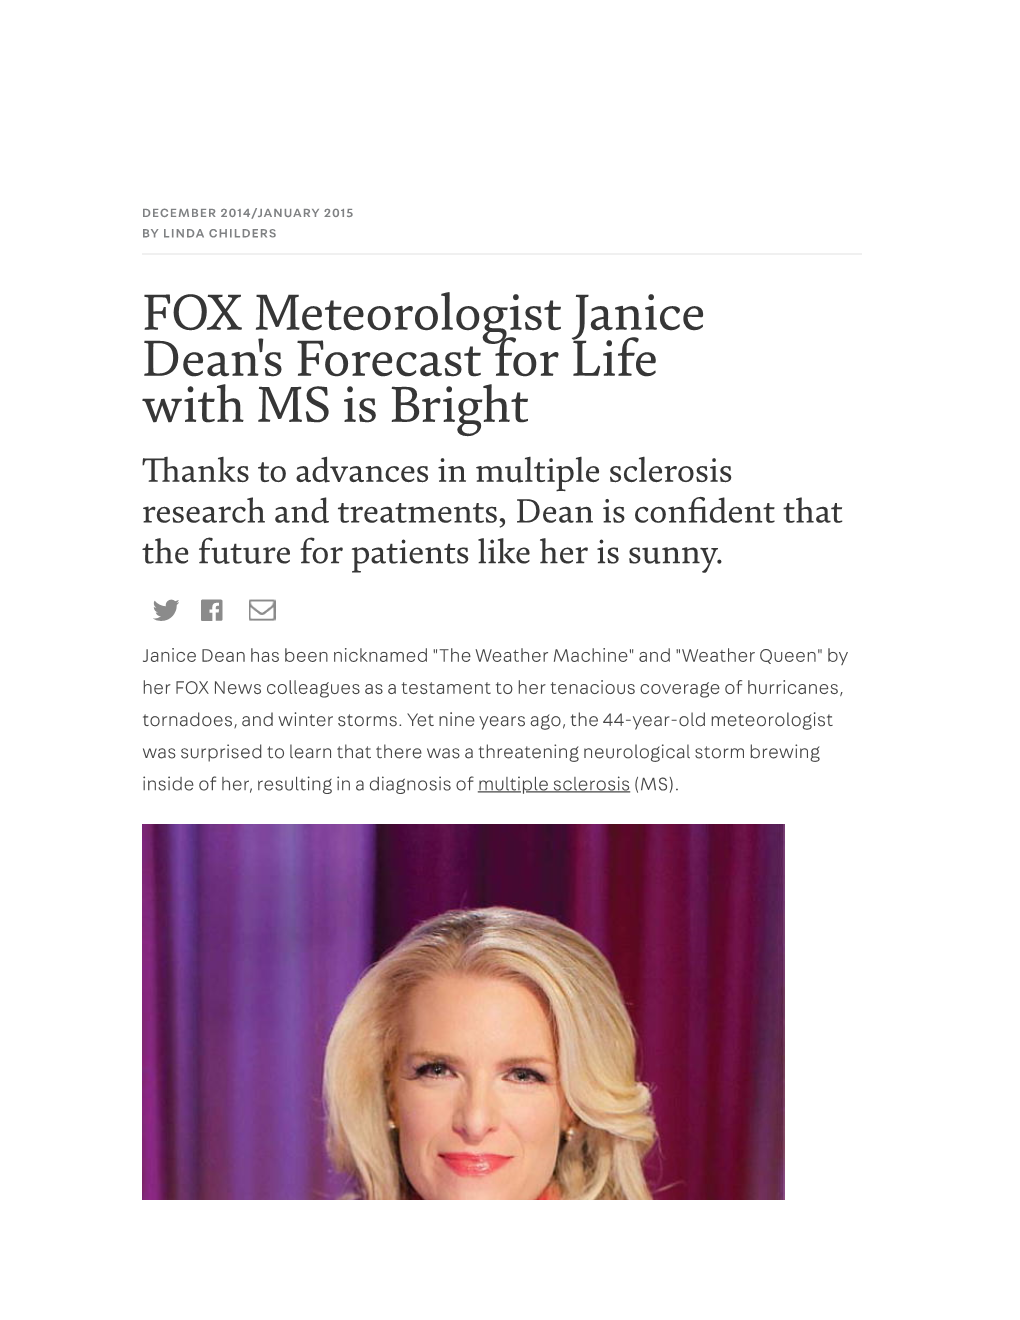 FOX Meteorologist Janice Dean's Forecast for Life with MS Is Bright